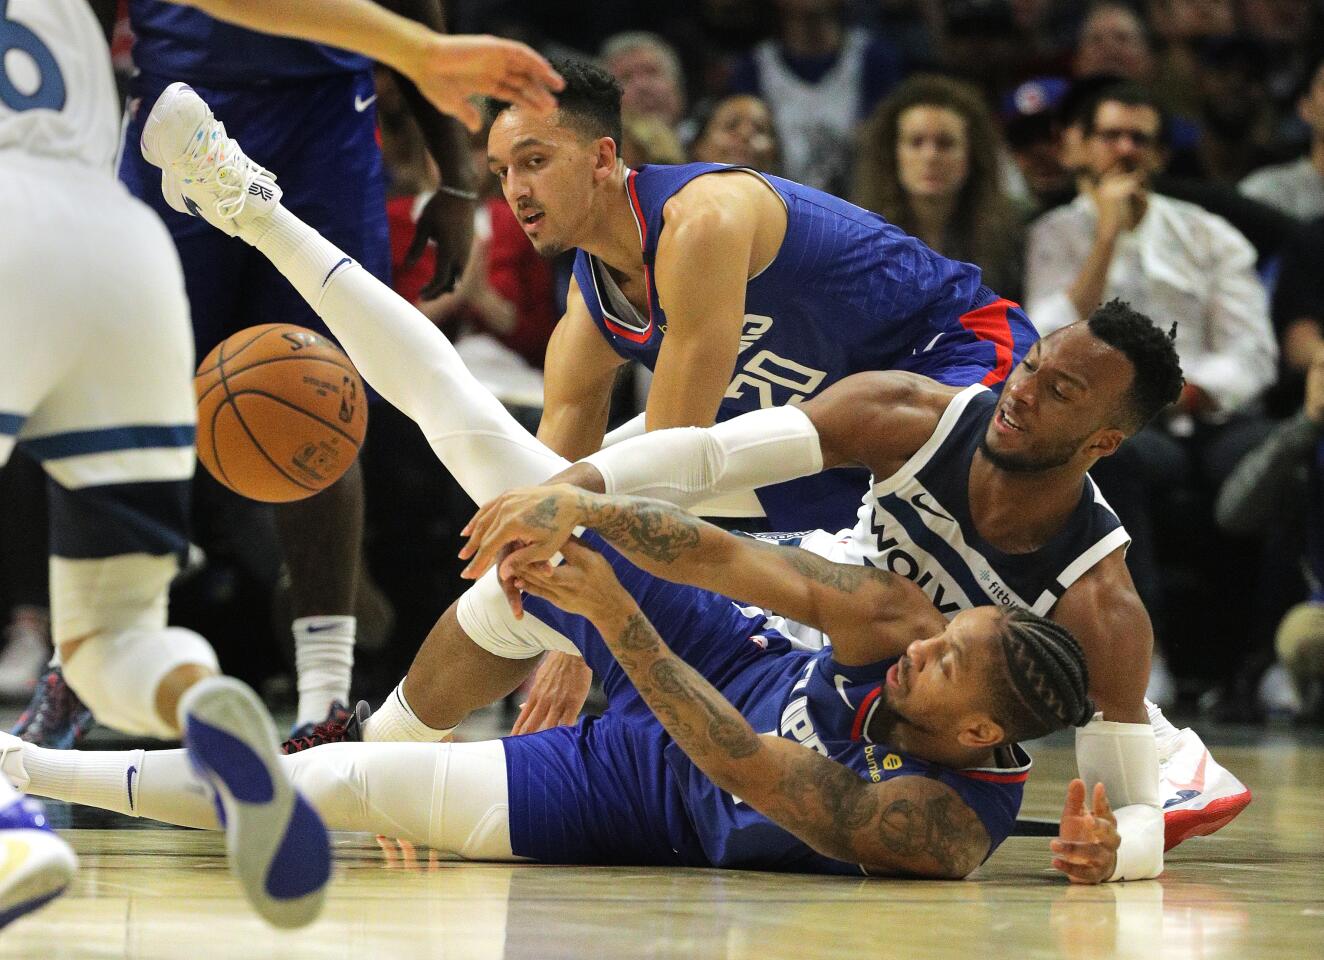 Clippers guard Rodney McGruder, front, recovers the ball during a scrum on the floor with Timberwolves guard Josh Okogie during the second half of a game Feb. 1 at Staples Center.